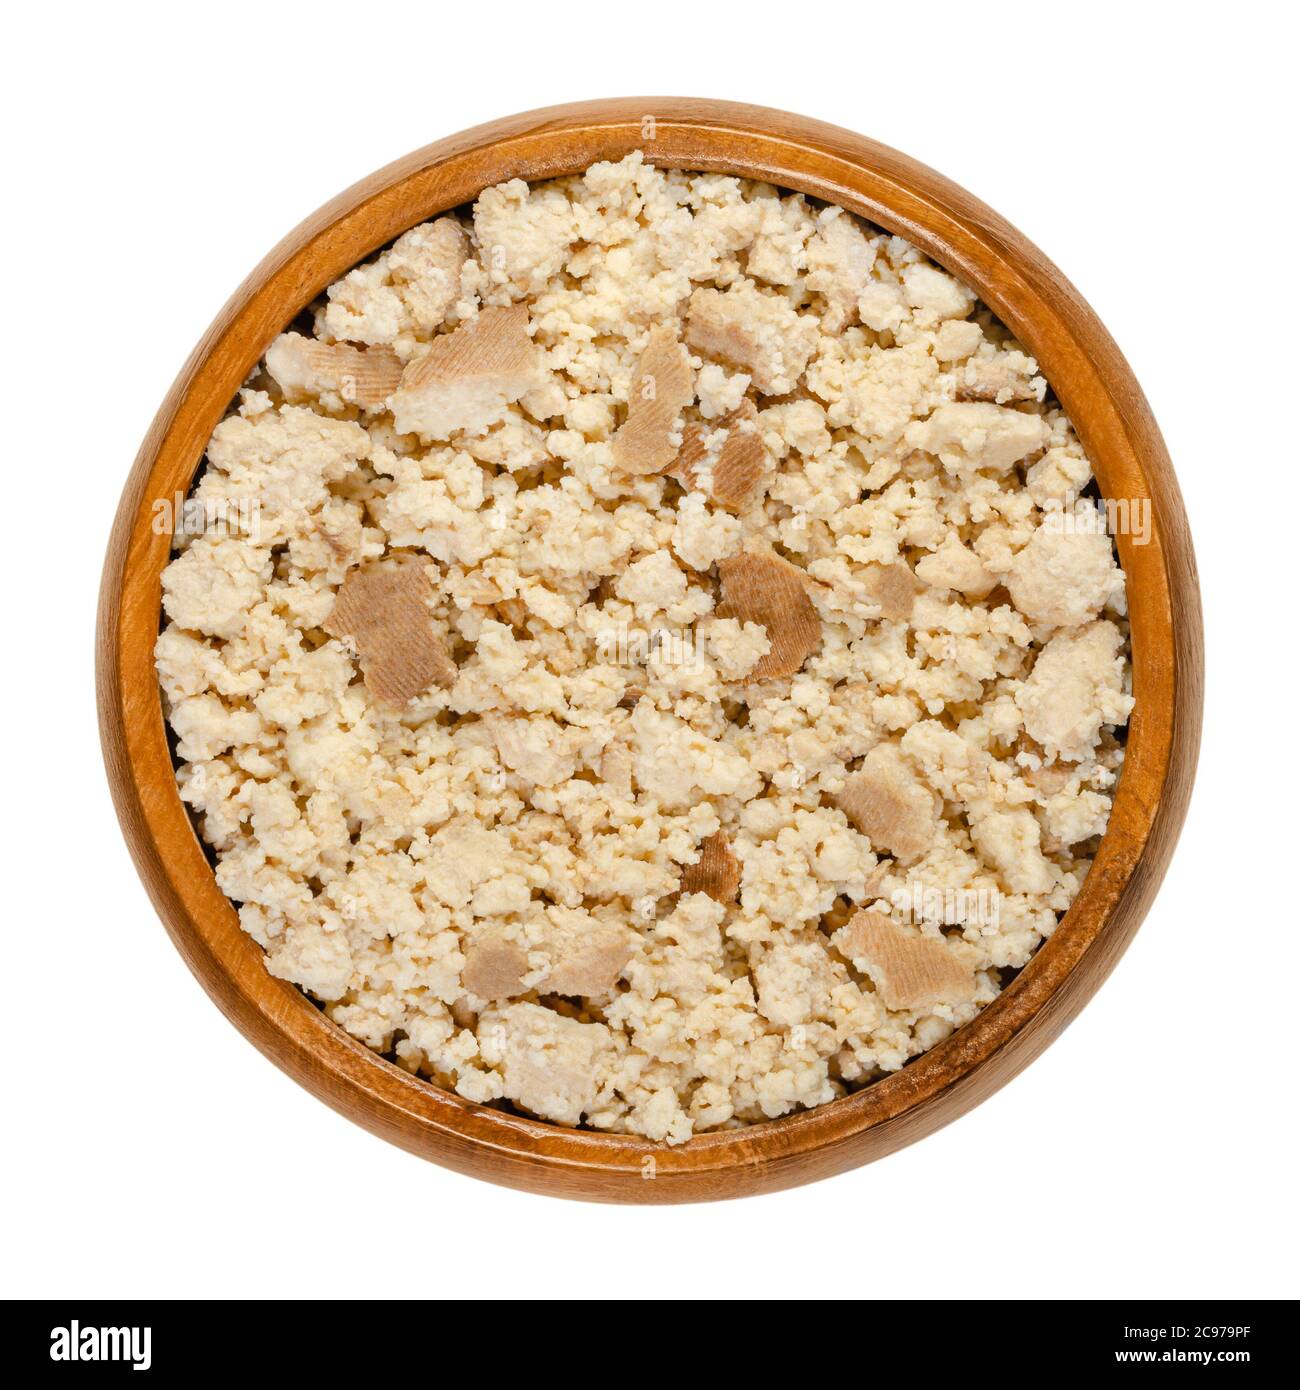 Smoked tofu, bean curd, crumbled by hand, in a wooden bowl. Coagulated soy milk, a component of Asian cuisine and meat substitute. Close-up from above Stock Photo